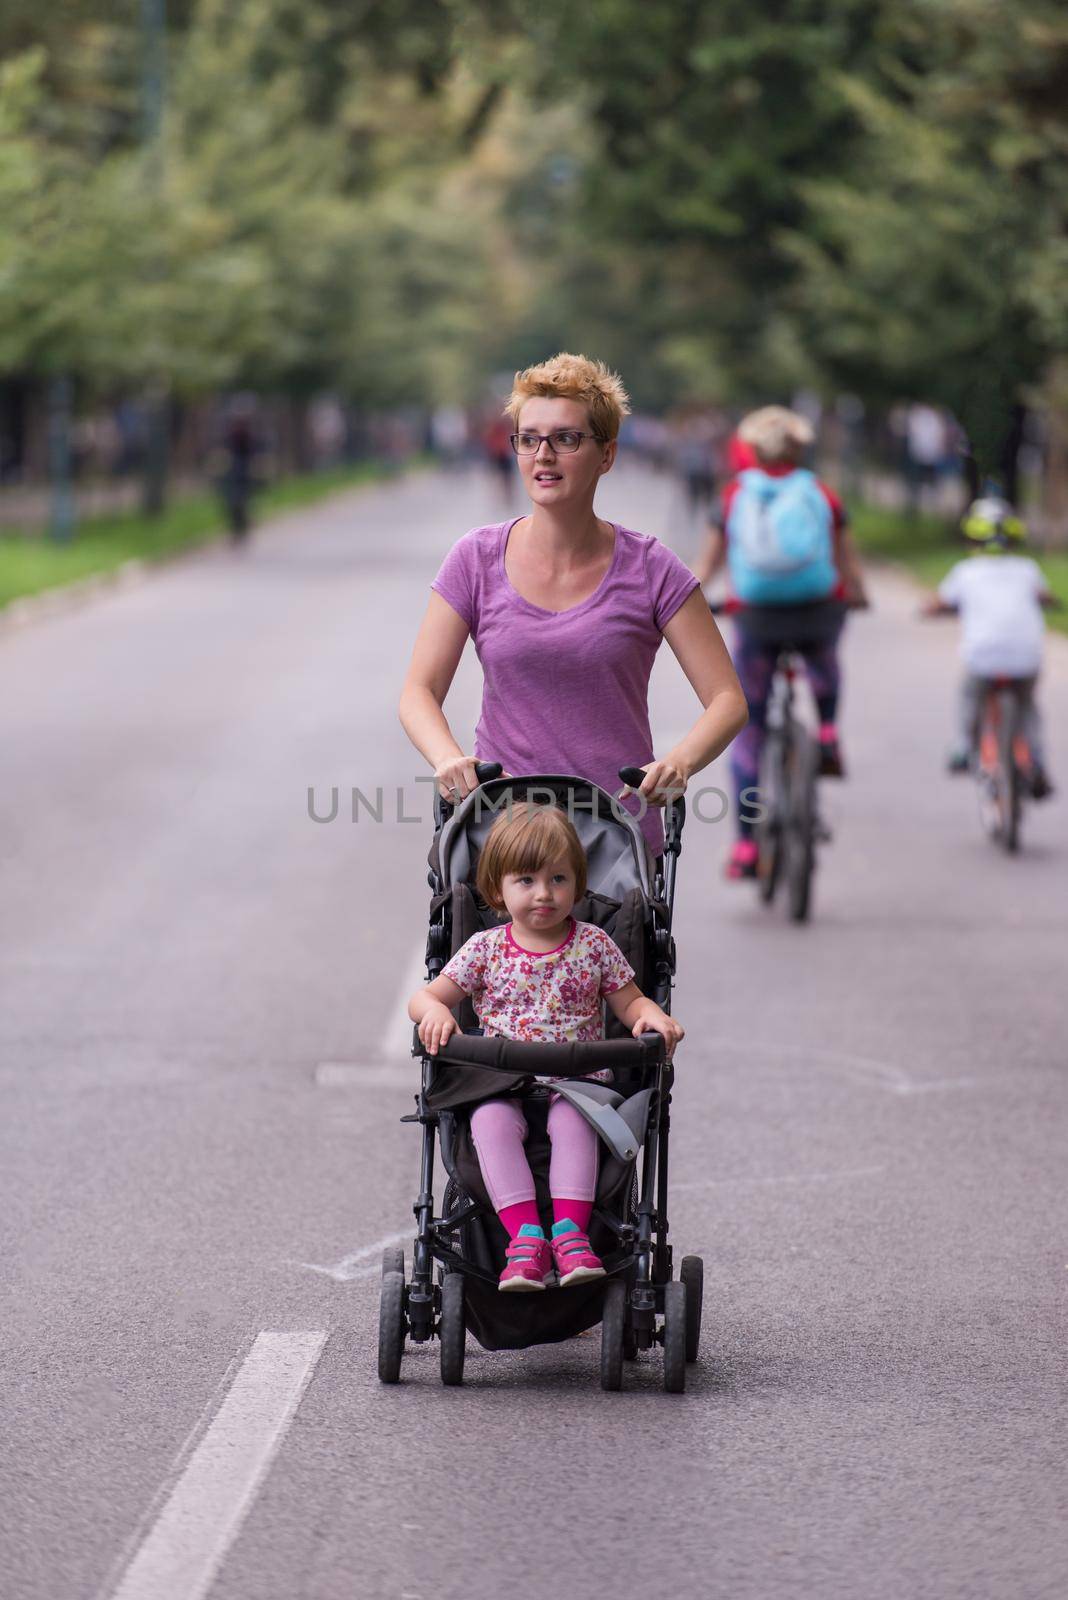 young healthy mother jogging while pushing a baby stroller at city park